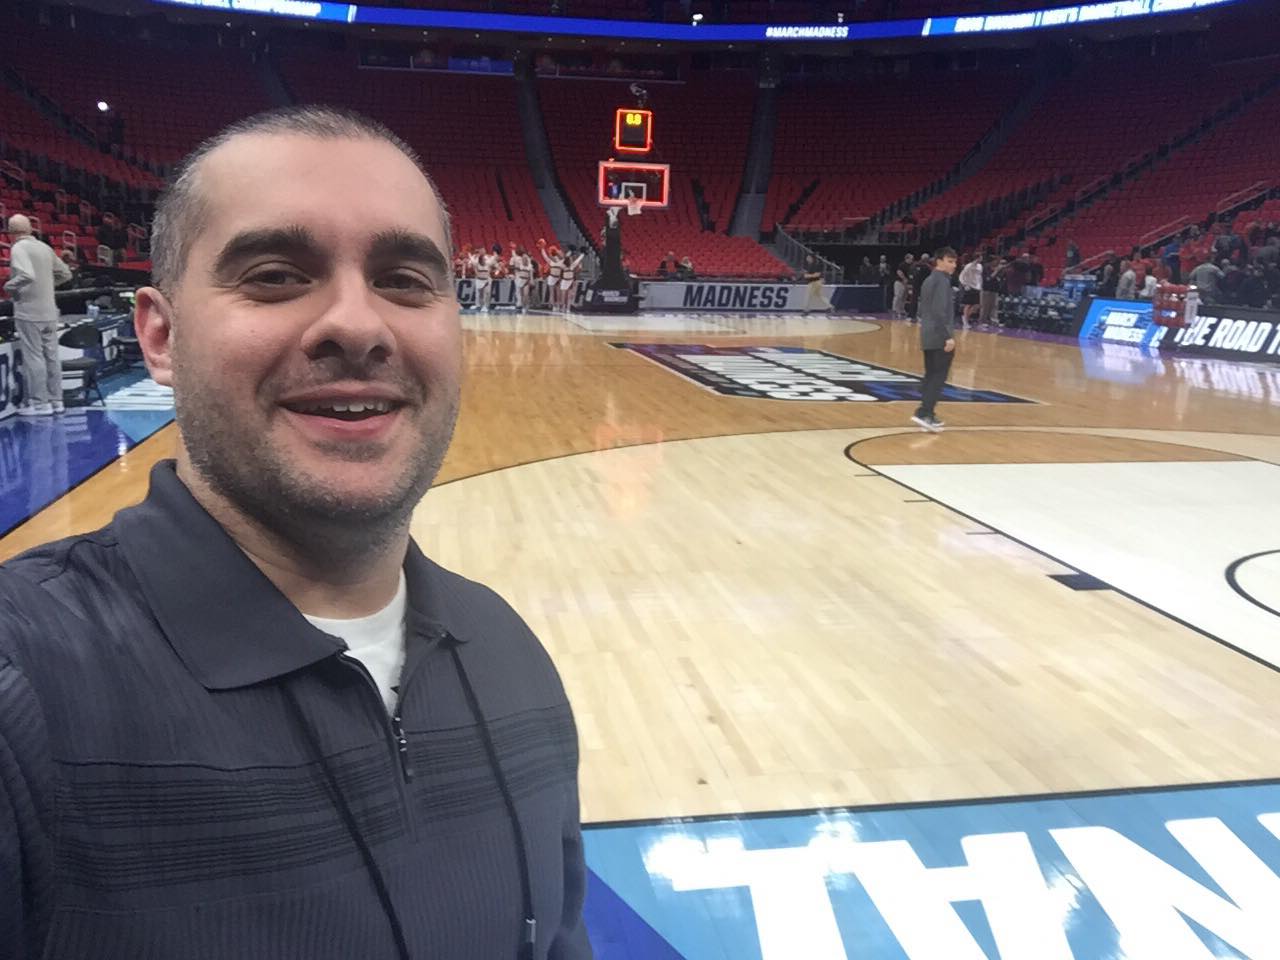 EPISODE 51 of 2018 - Dan Tortora shares the Sounds of the NCAA Tournament & Signature Segments BROADCASTING FROM DETROIT